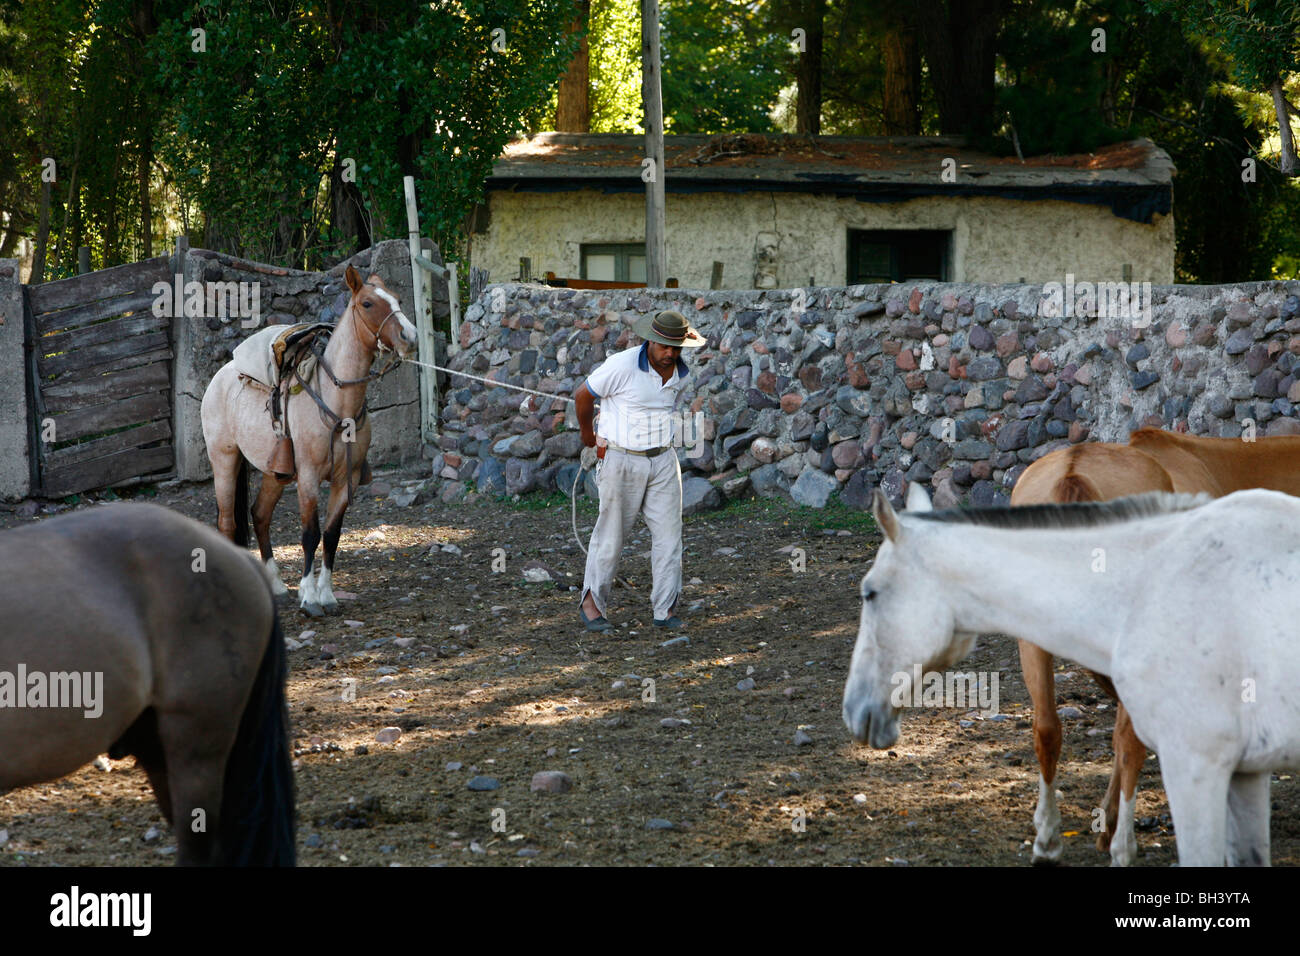 Gaucho with a horse in a farm at Valle de Uco, Mendoza region, Argentina. Stock Photo